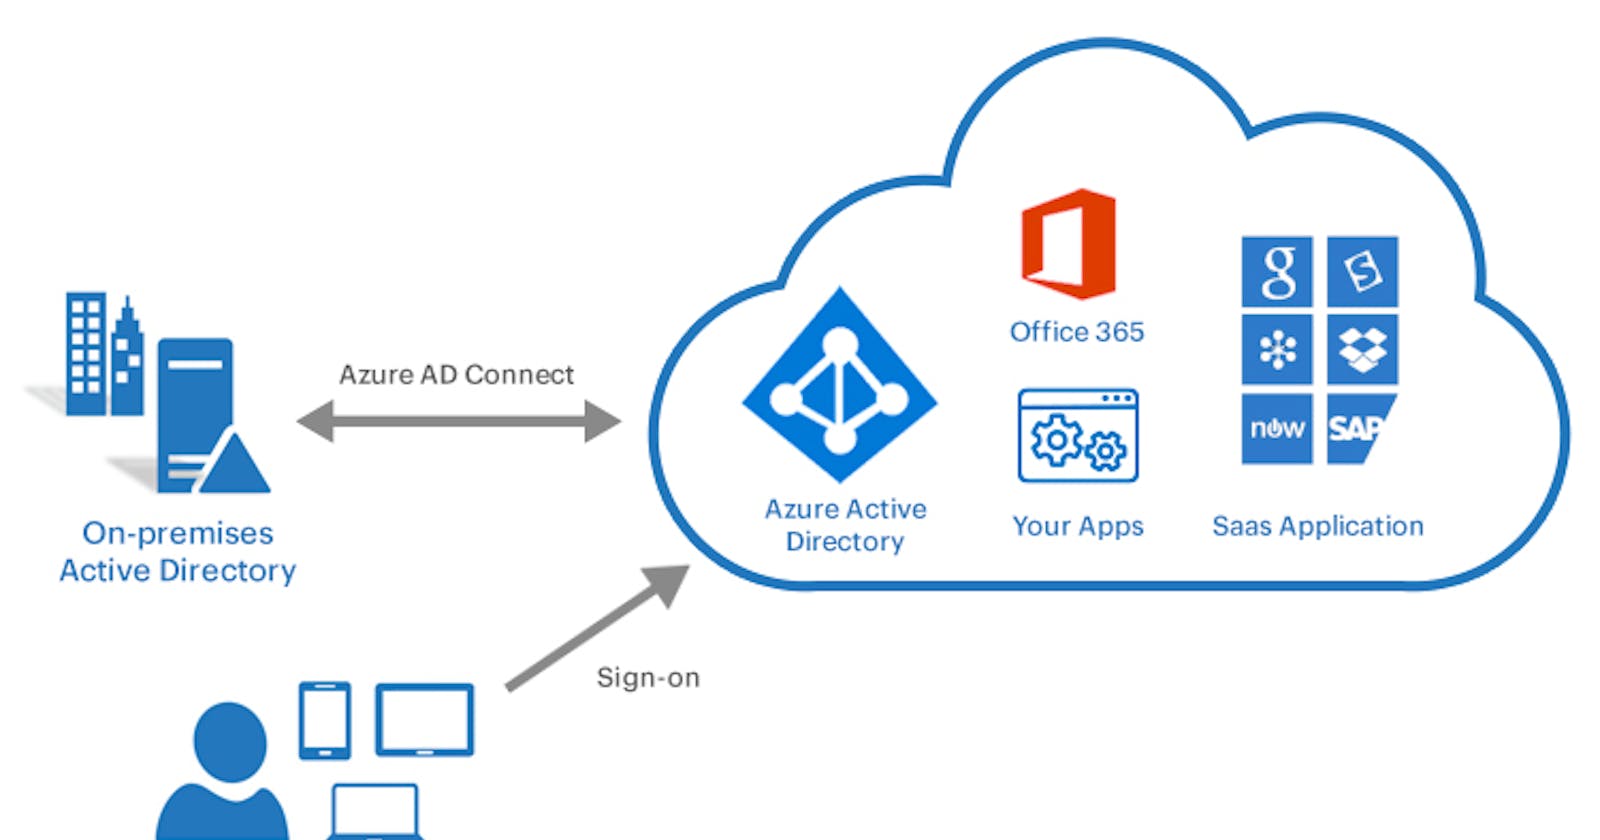 What is Azure Active Directory?